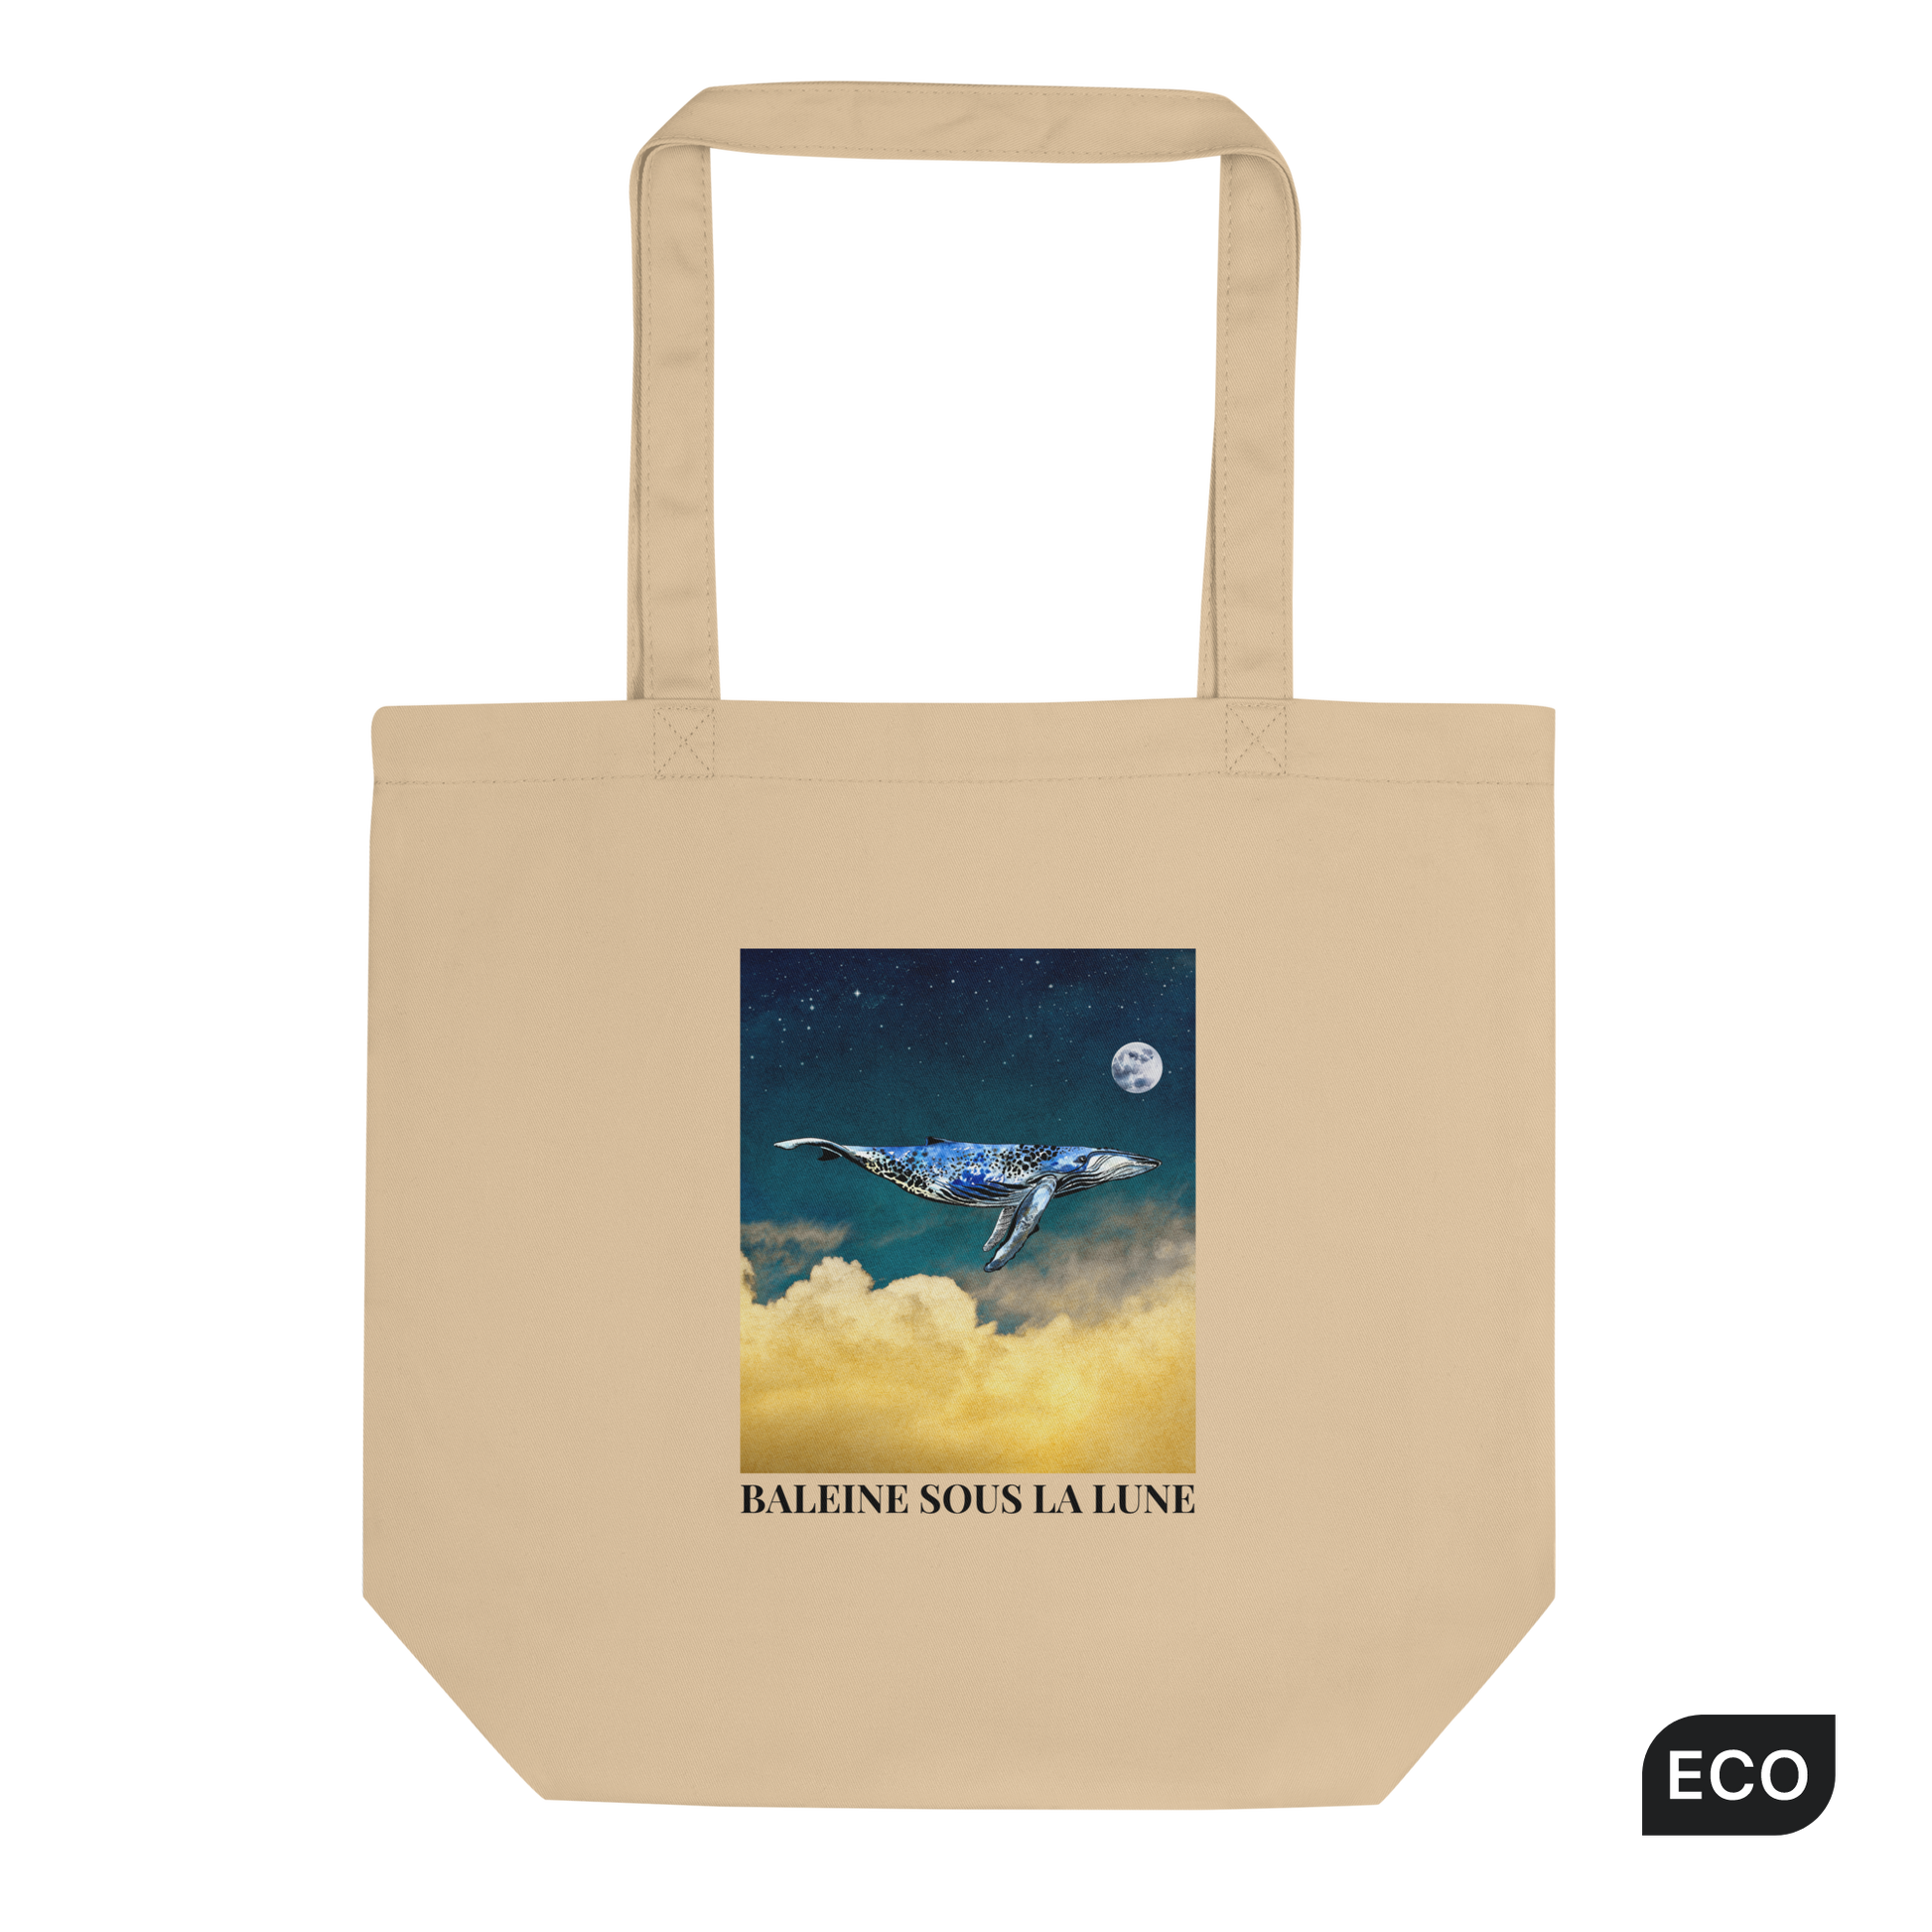 Oyster Colored Whale Eco Tote Bag featuring a majestic Whale Under The Moon graphic - Shop Cool Organic Cotton Tote Bags Online - Boozy Fox